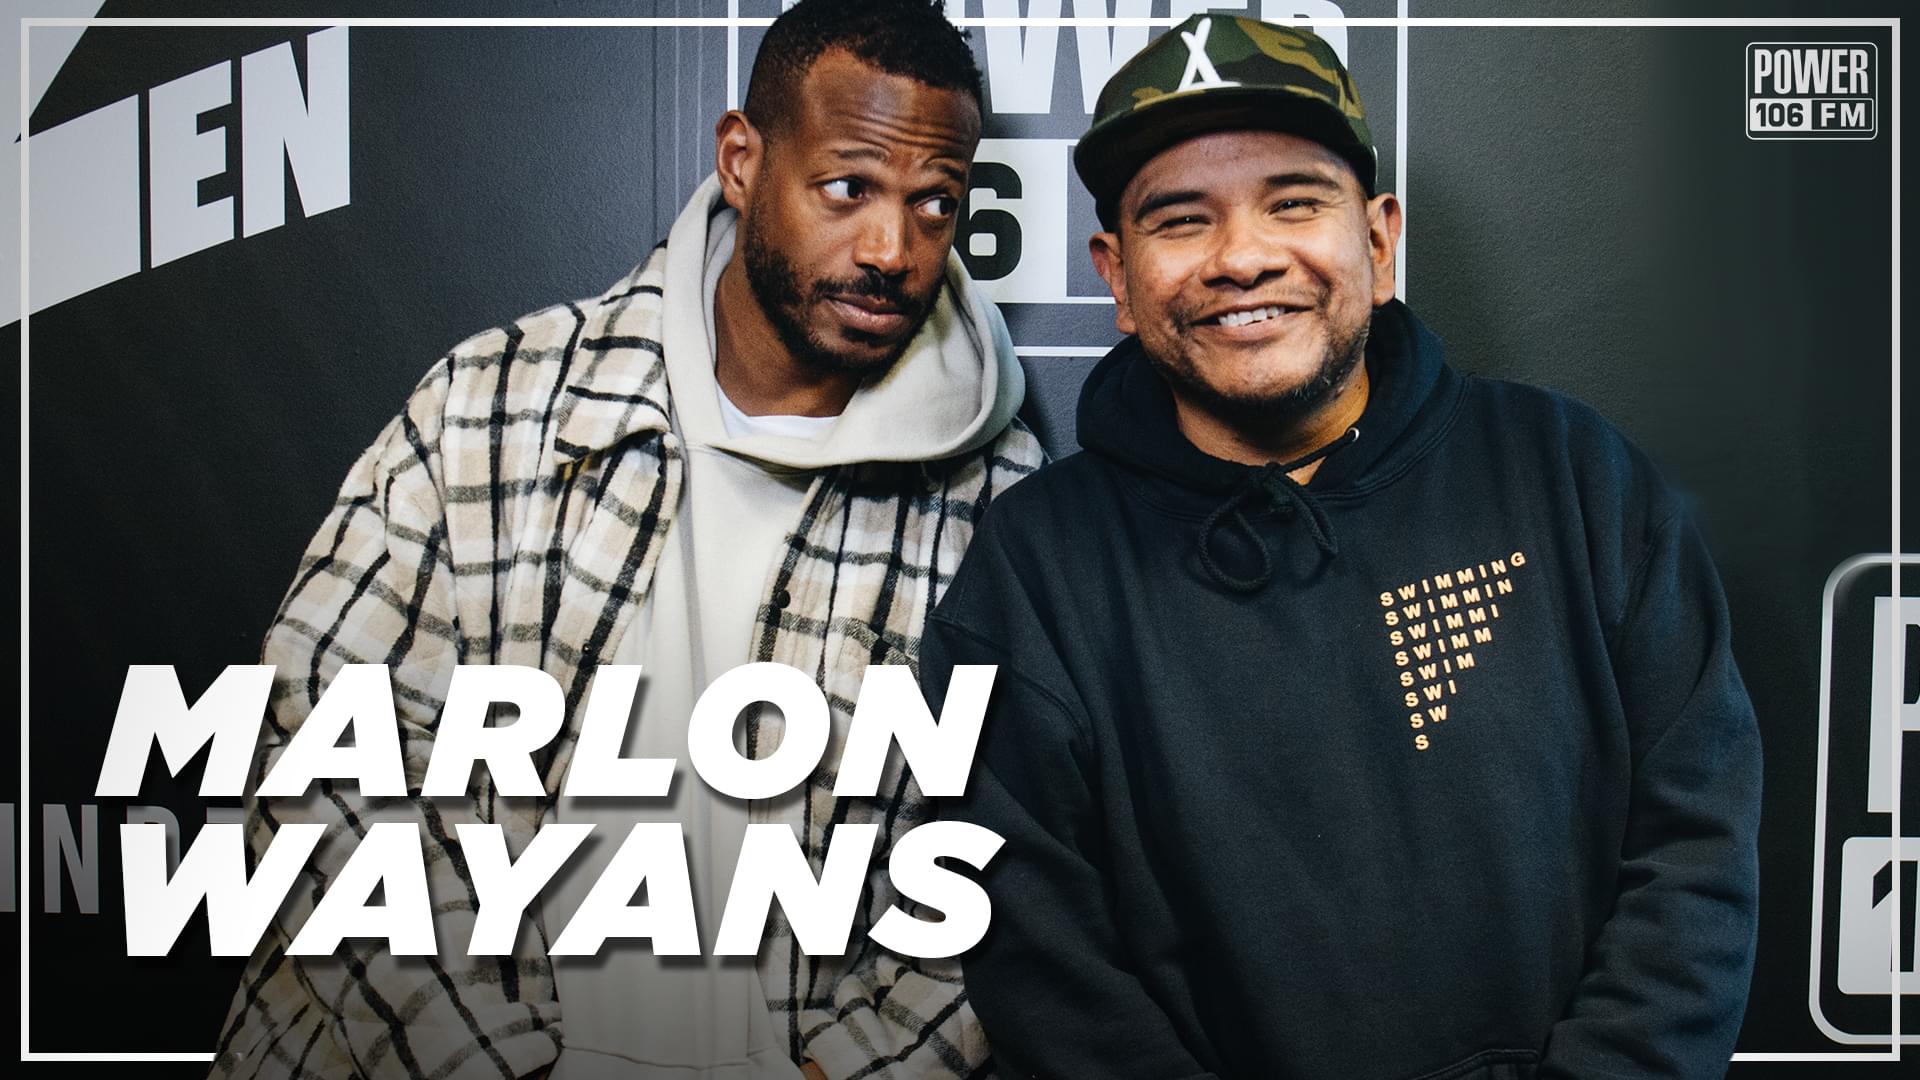 Marlon Wayans Says Kevin Hart Should Have Hosted The Oscars + Calls Out Online Trolls